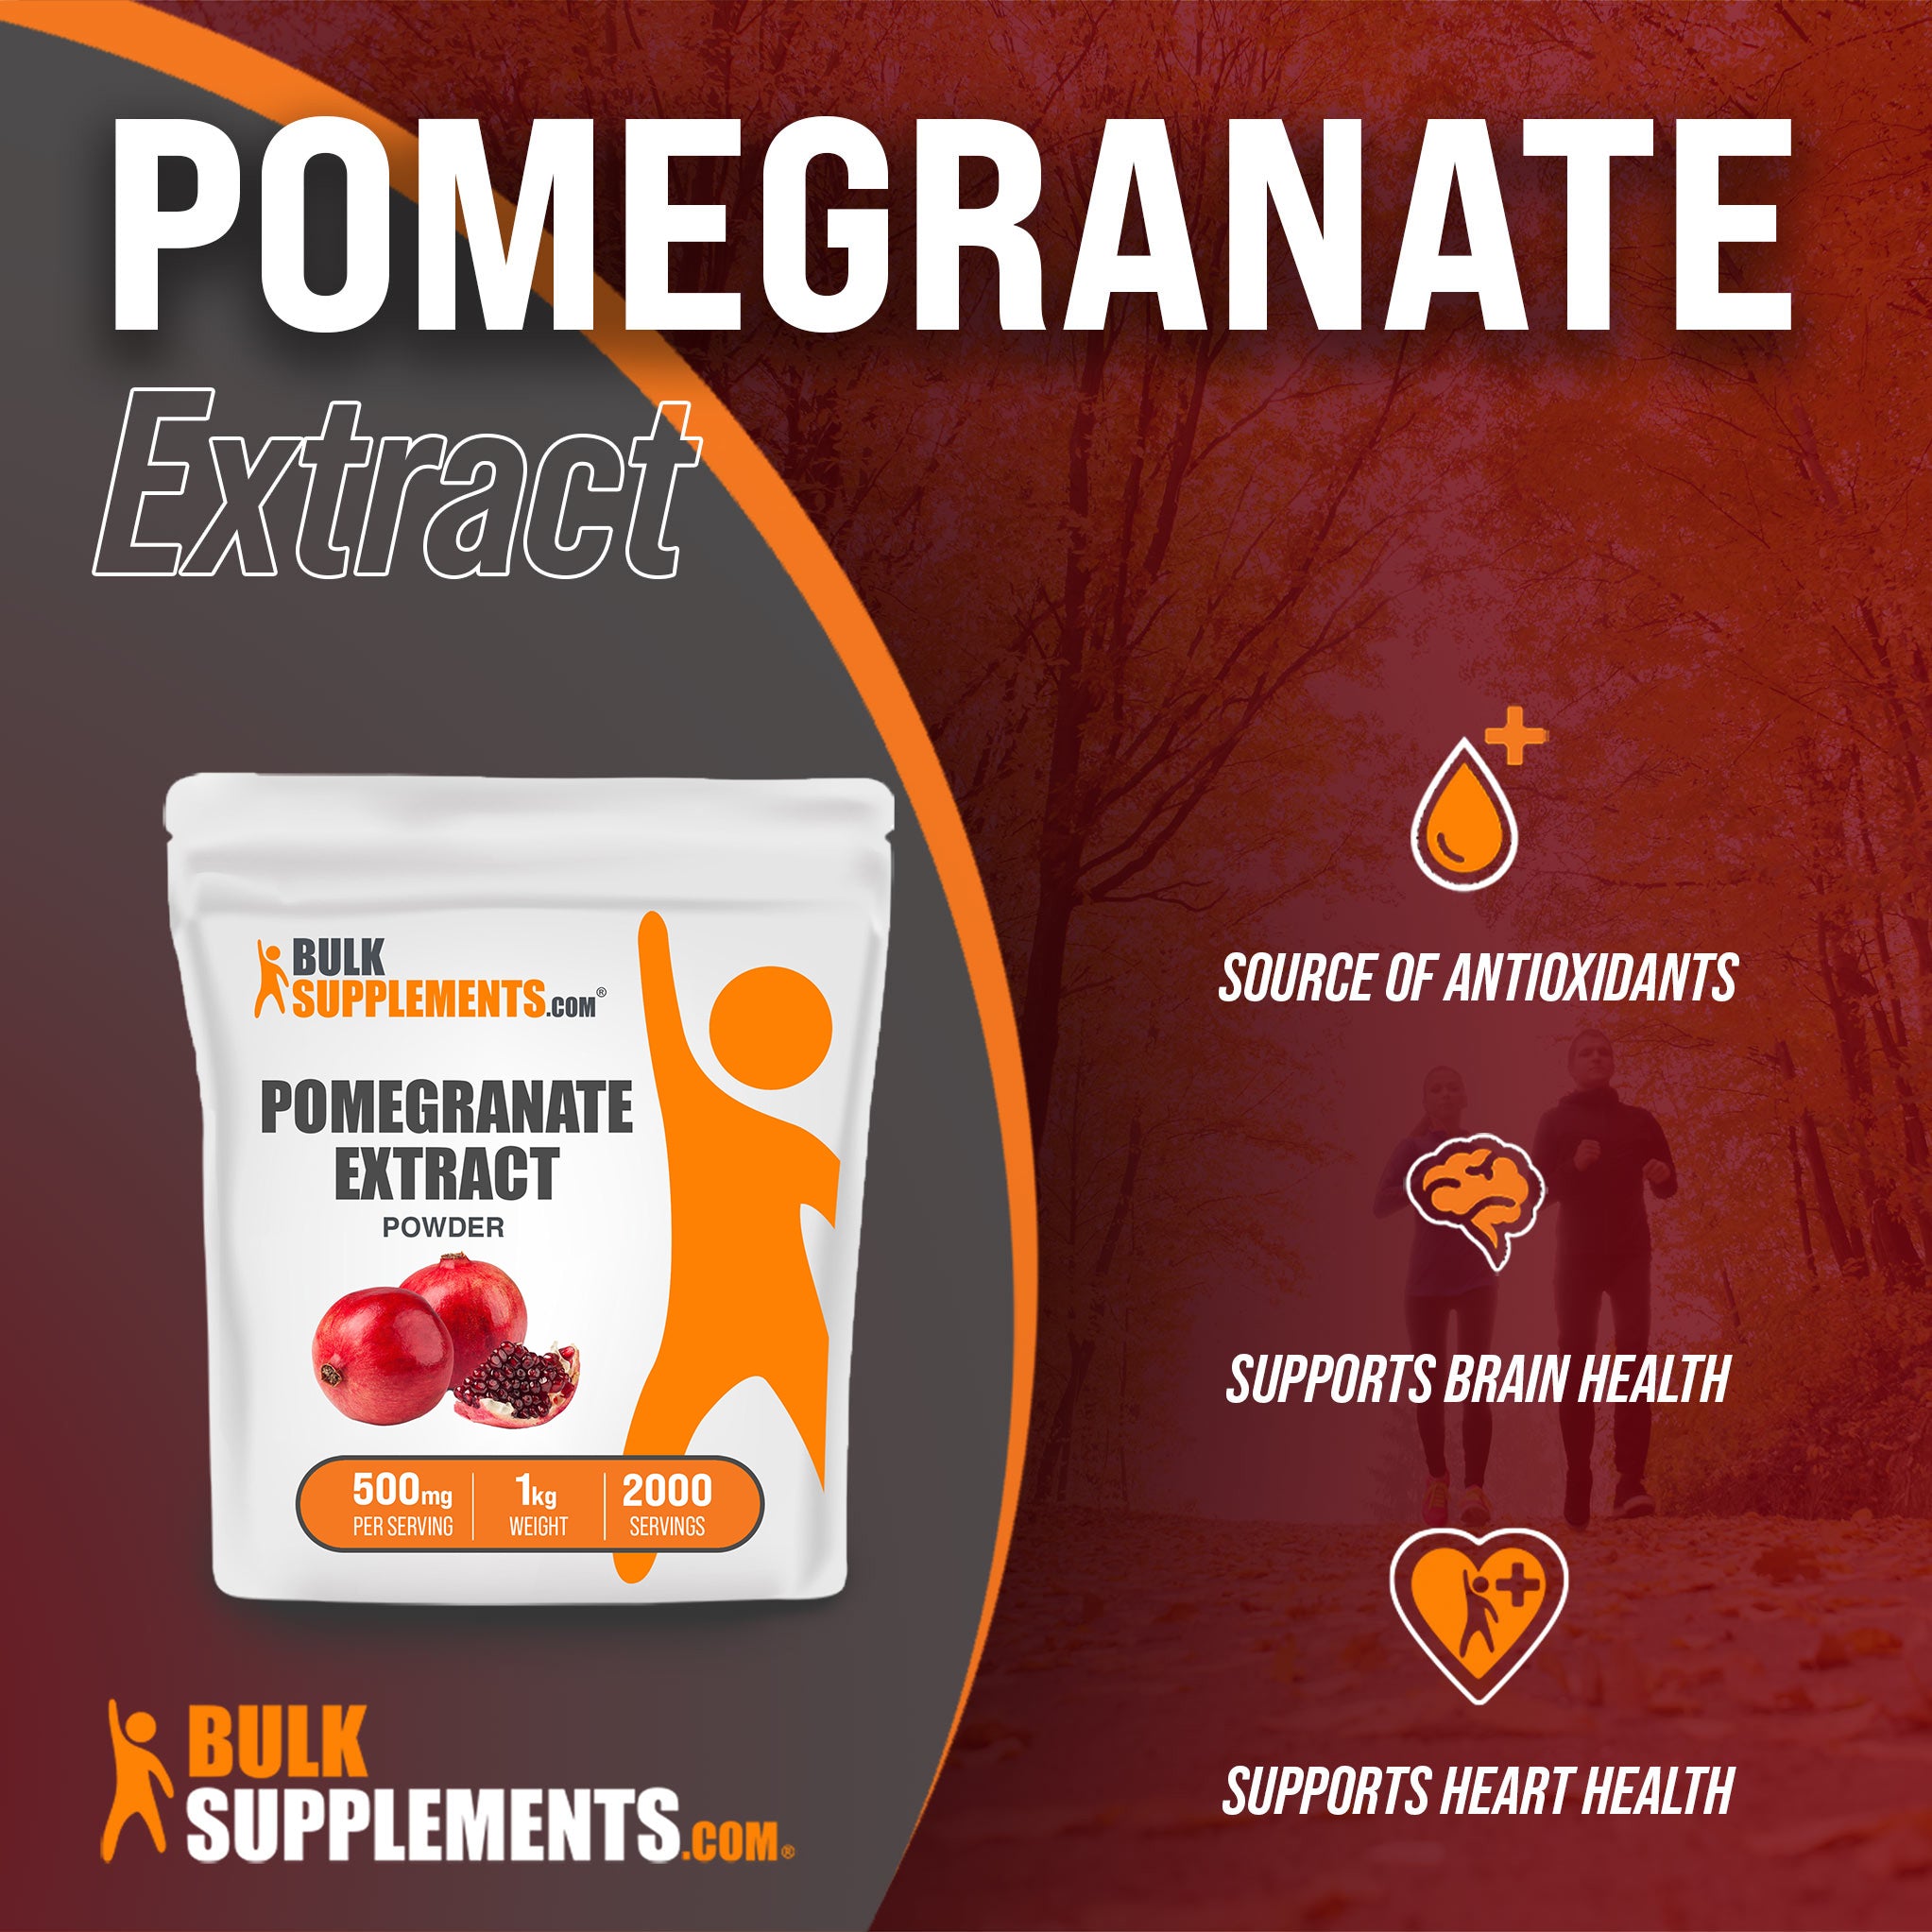 Benefits of Pomegranate Extract: source of antioxidants, supports brain health, supports heart health